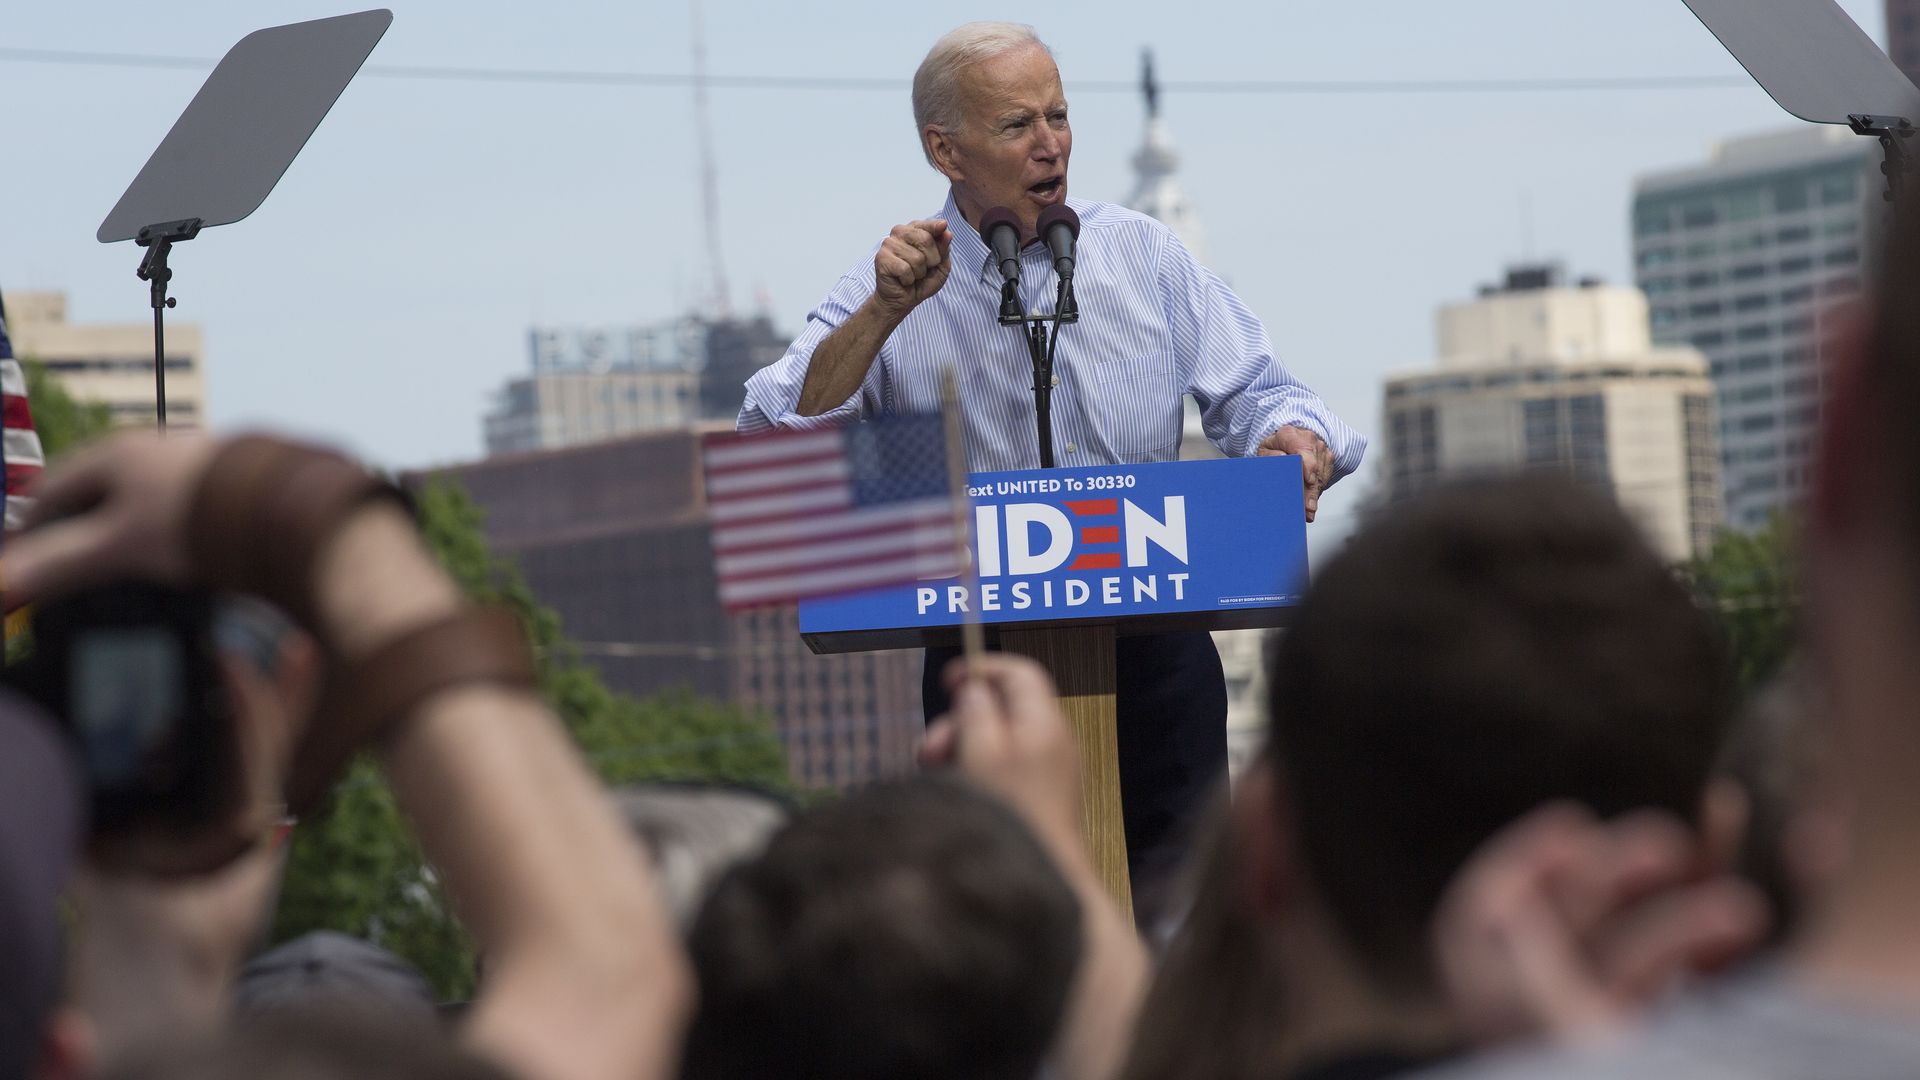 Former Vice President Joe Biden campaigns for president at a kickoff rally on March 18, 2019 in downtown Philadelphia, Pennsylvania.